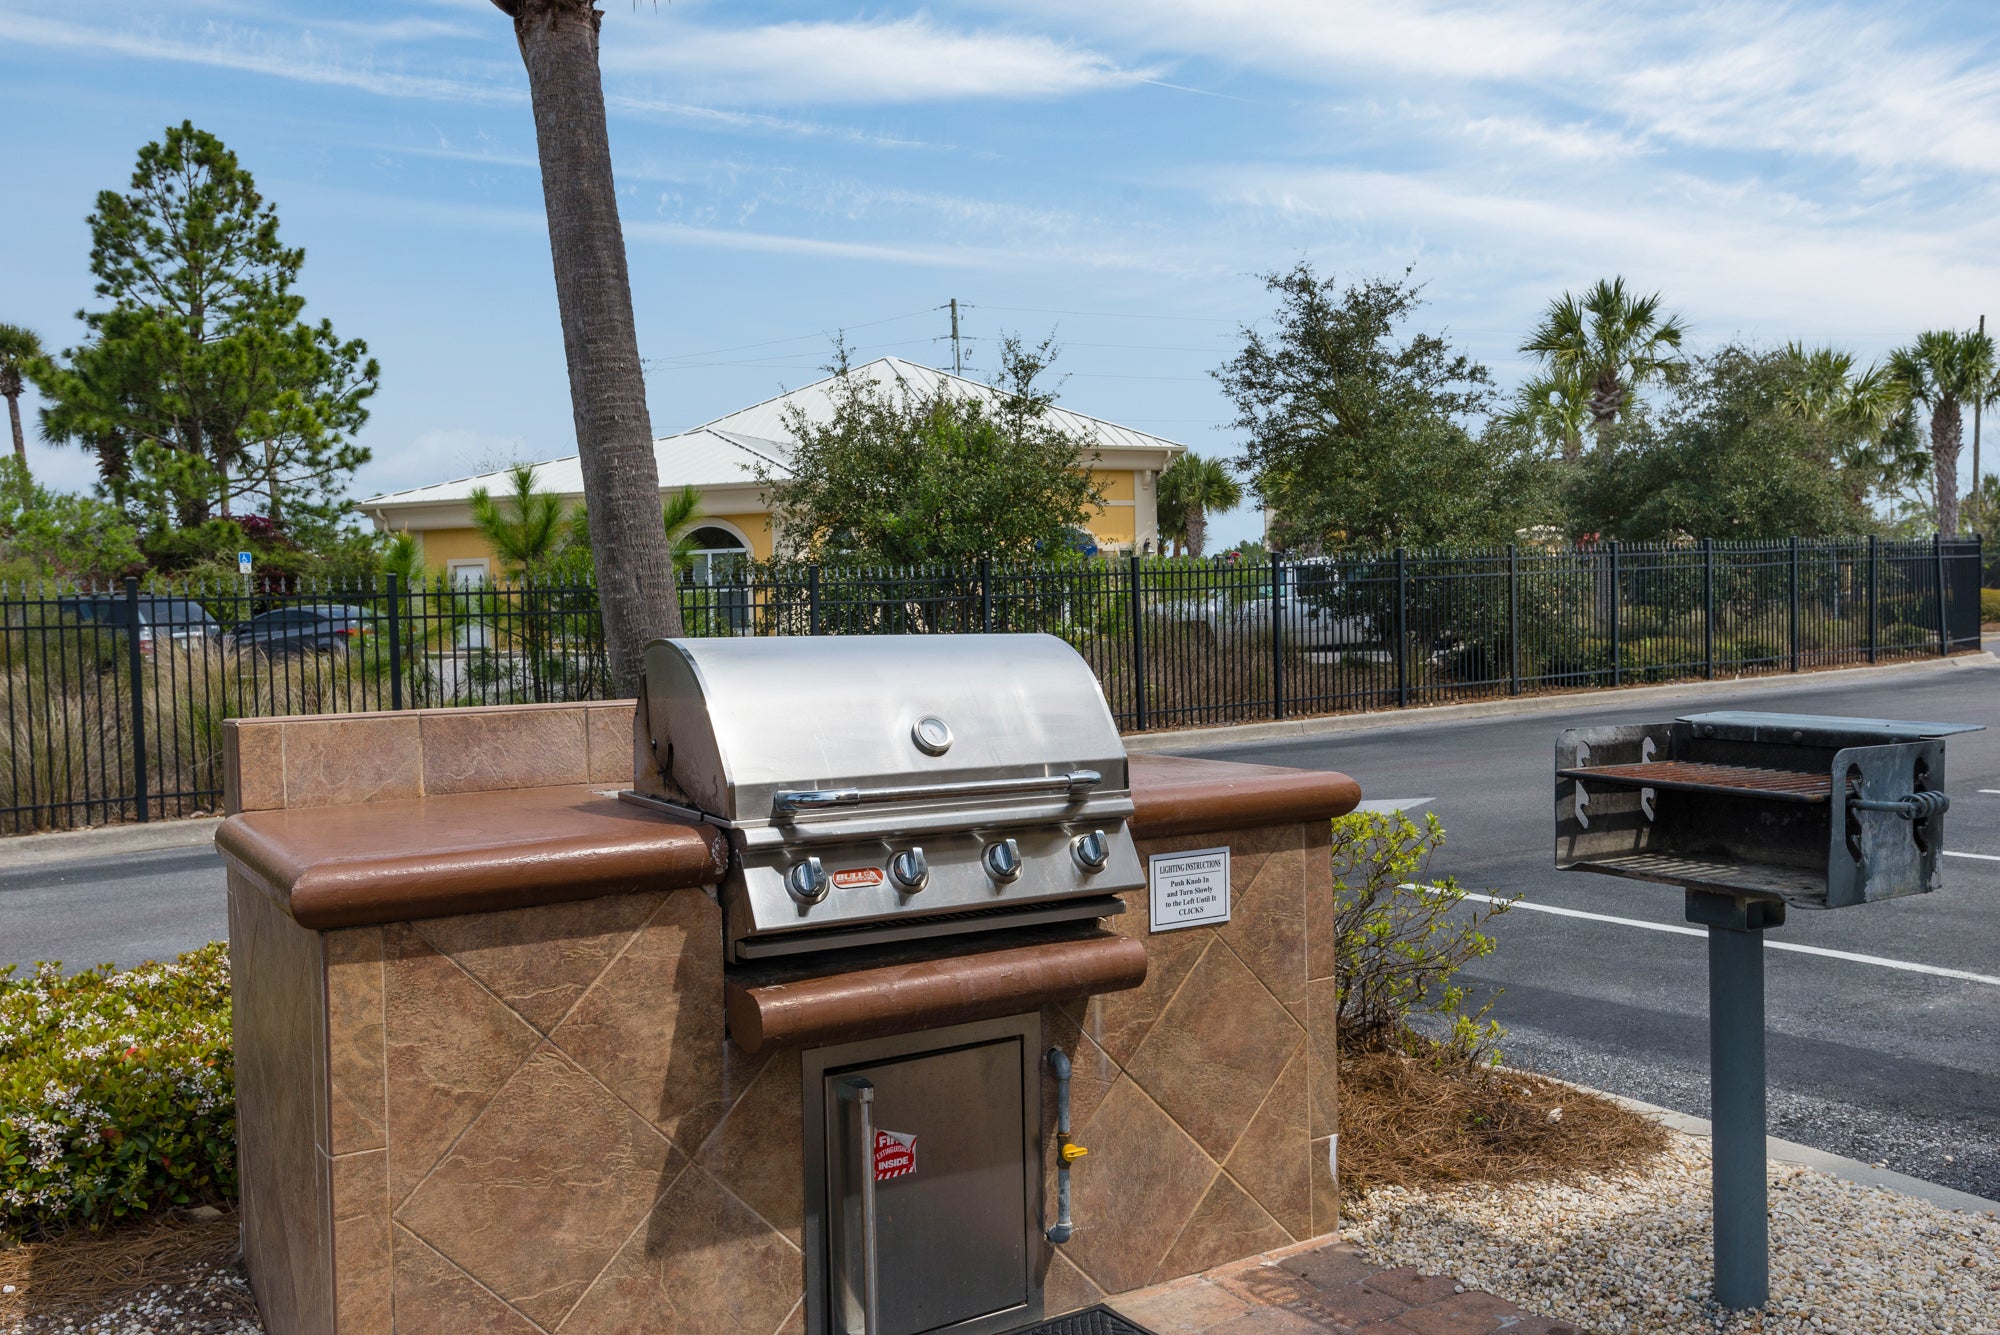 Viking Gas Grills scattered throughout Adagio